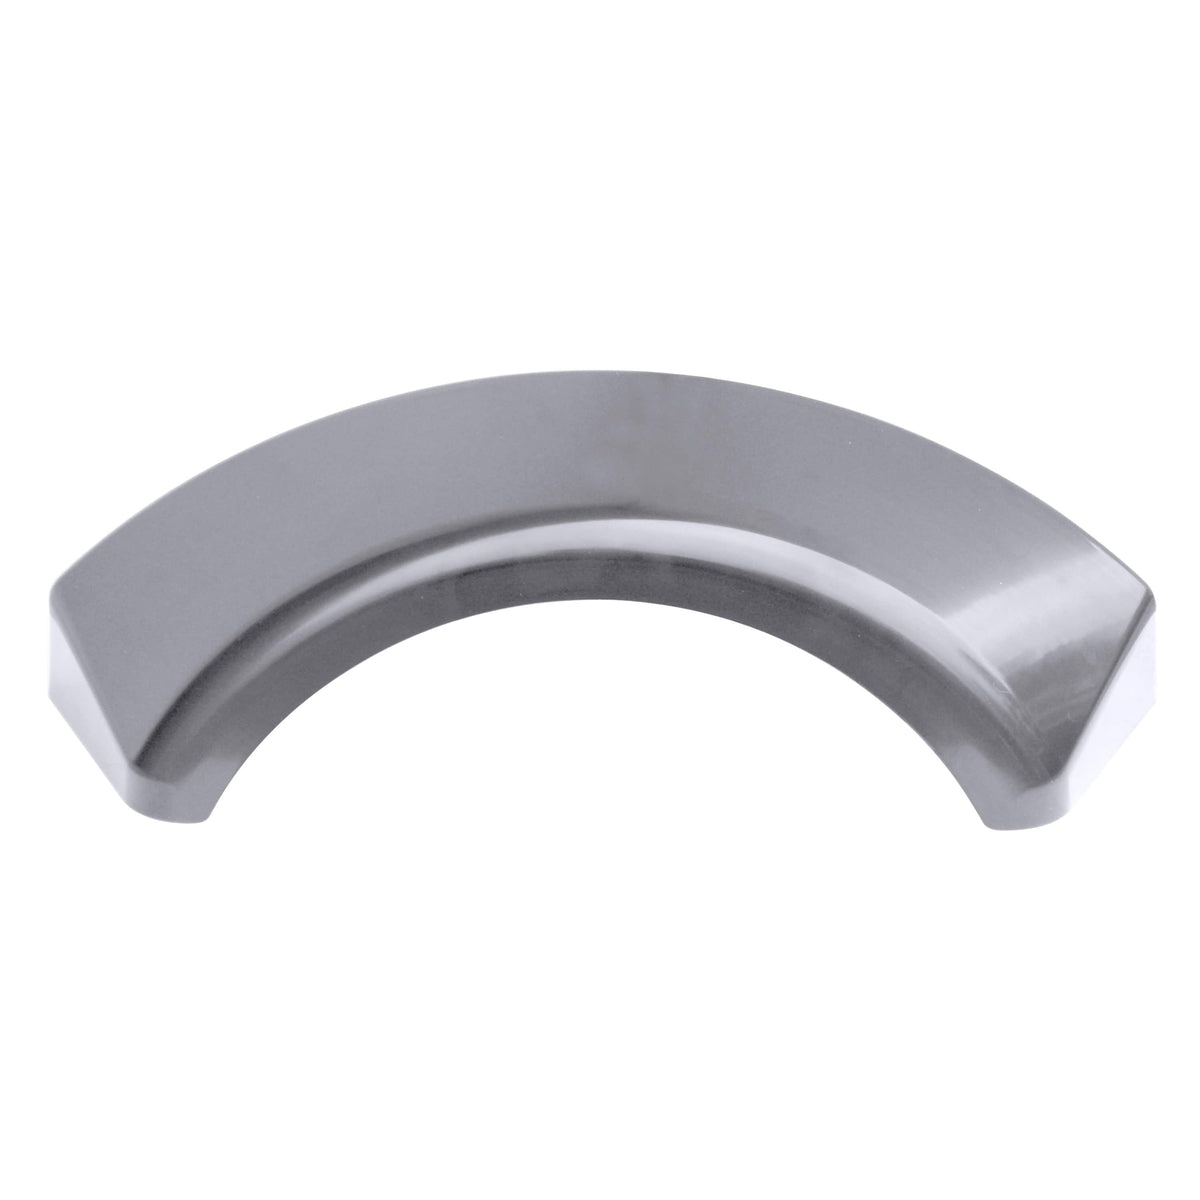 Tie Down Engineering Qualifies for Free Shipping Tie Down PWC Plastic Fender Bracket Less Silver #86556